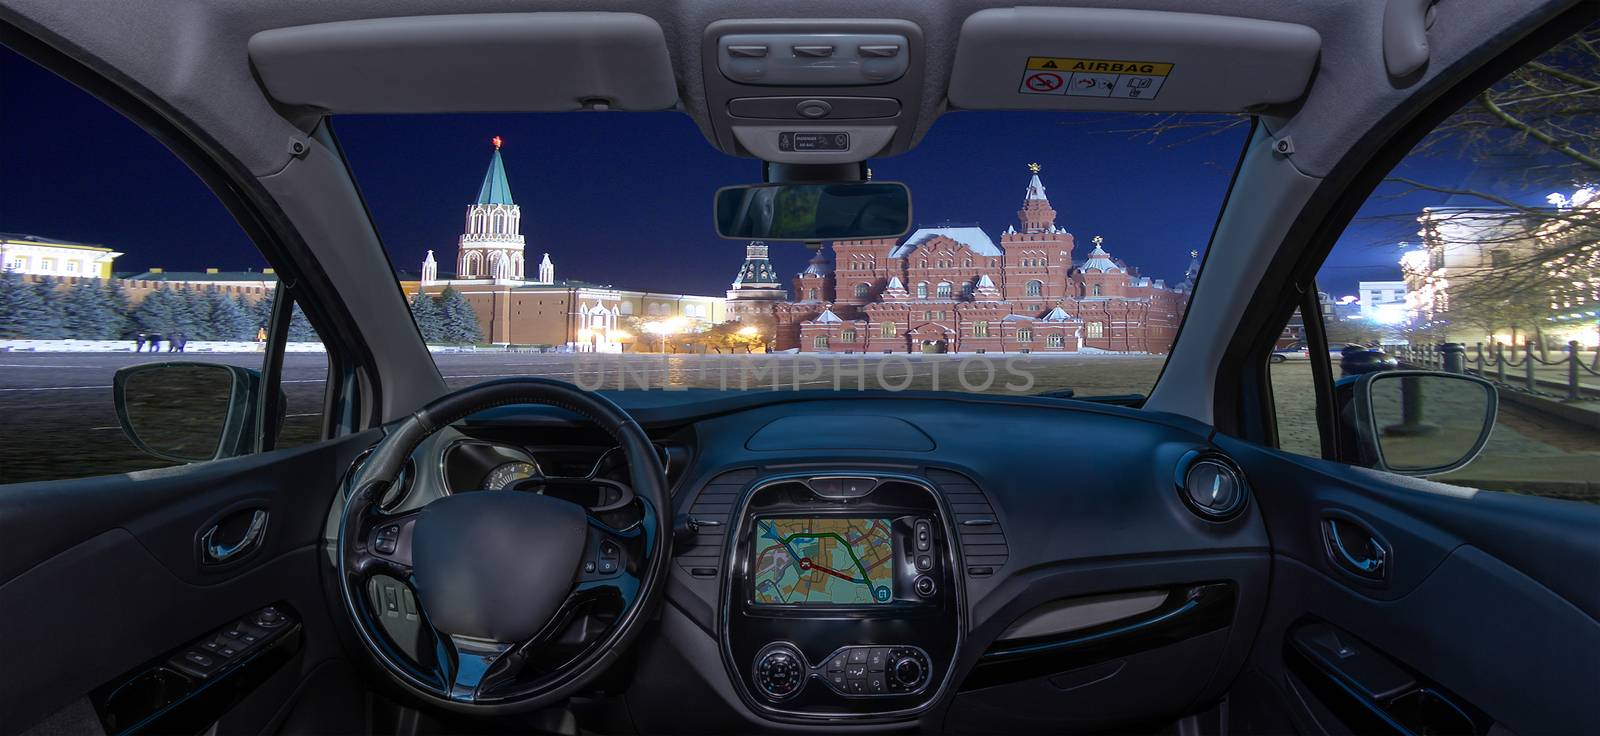 Car windshield view of Red Square at night, Moscow, Russia by marcorubino